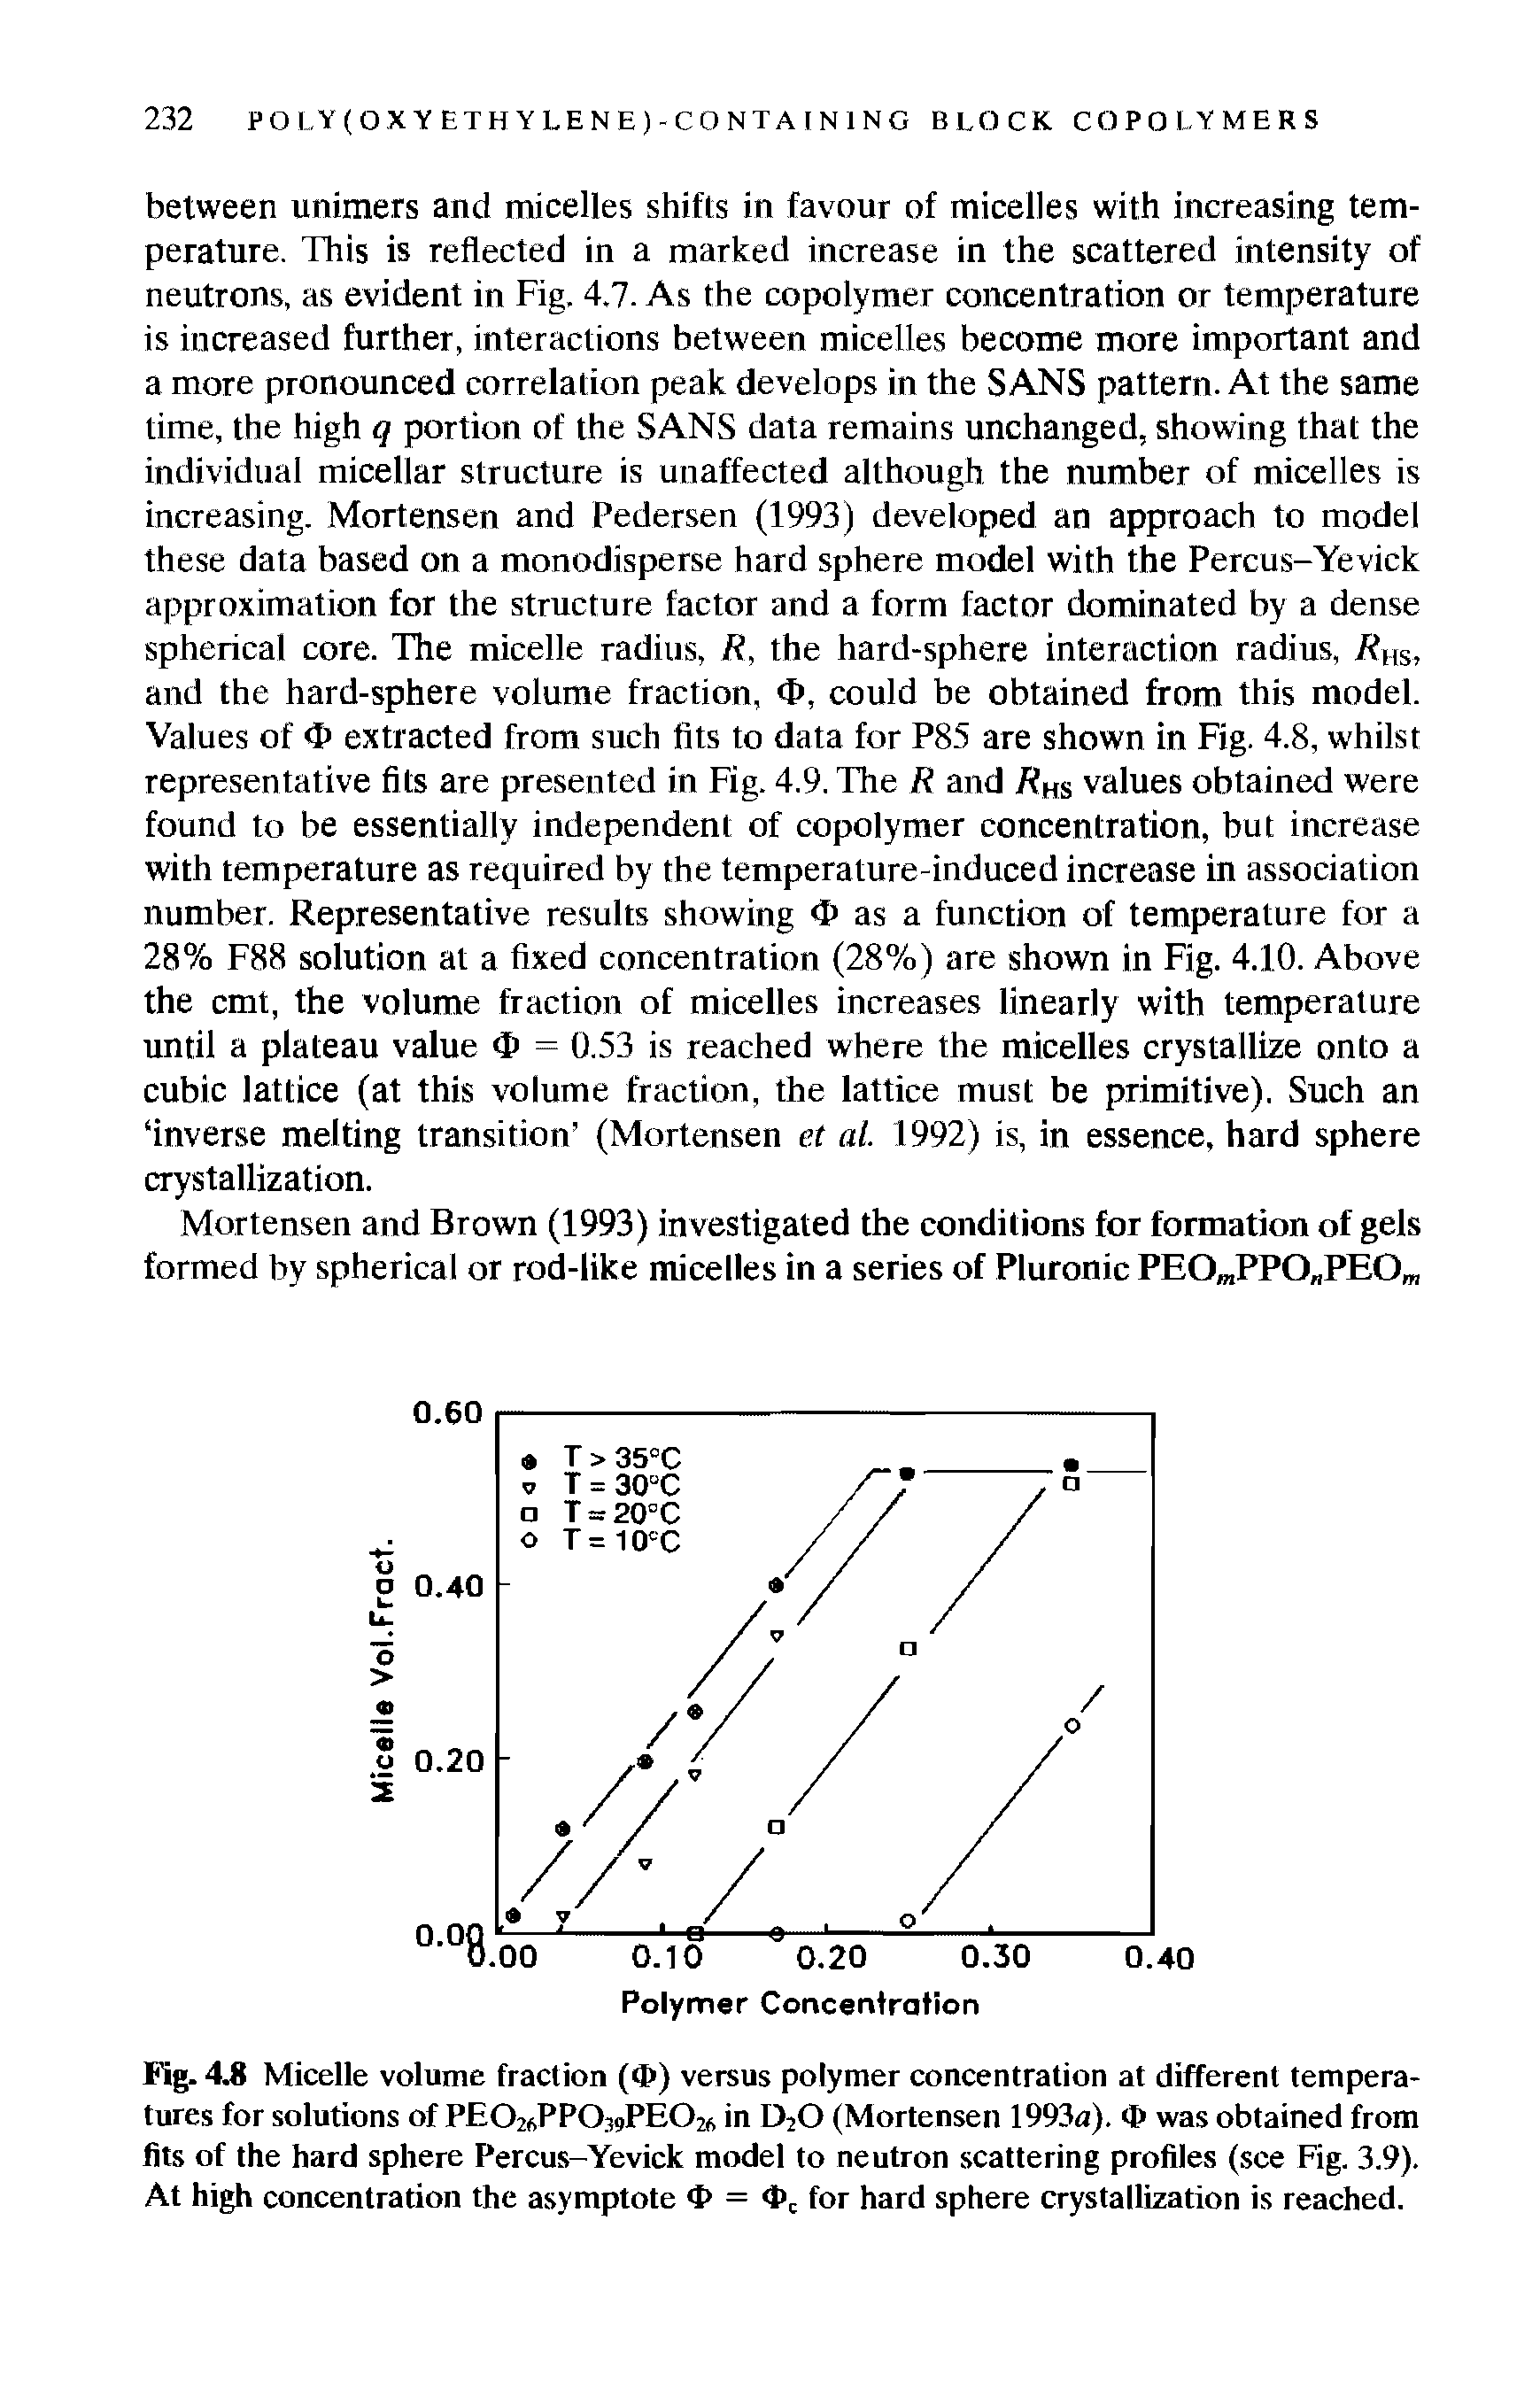 Fig. 4.8 Micelle volume fraction (<I>) versus polymer concentration at different temperatures for solutions of PEO26PPO39PEO26 in D20 (Mortensen 1993a). 4> was obtained from fits of the hard sphere Percus-Yevick model to neutron scattering profiles (see Fig. 3.9). At high concentration the asymptote <I> = for hard sphere crystallization is reached.